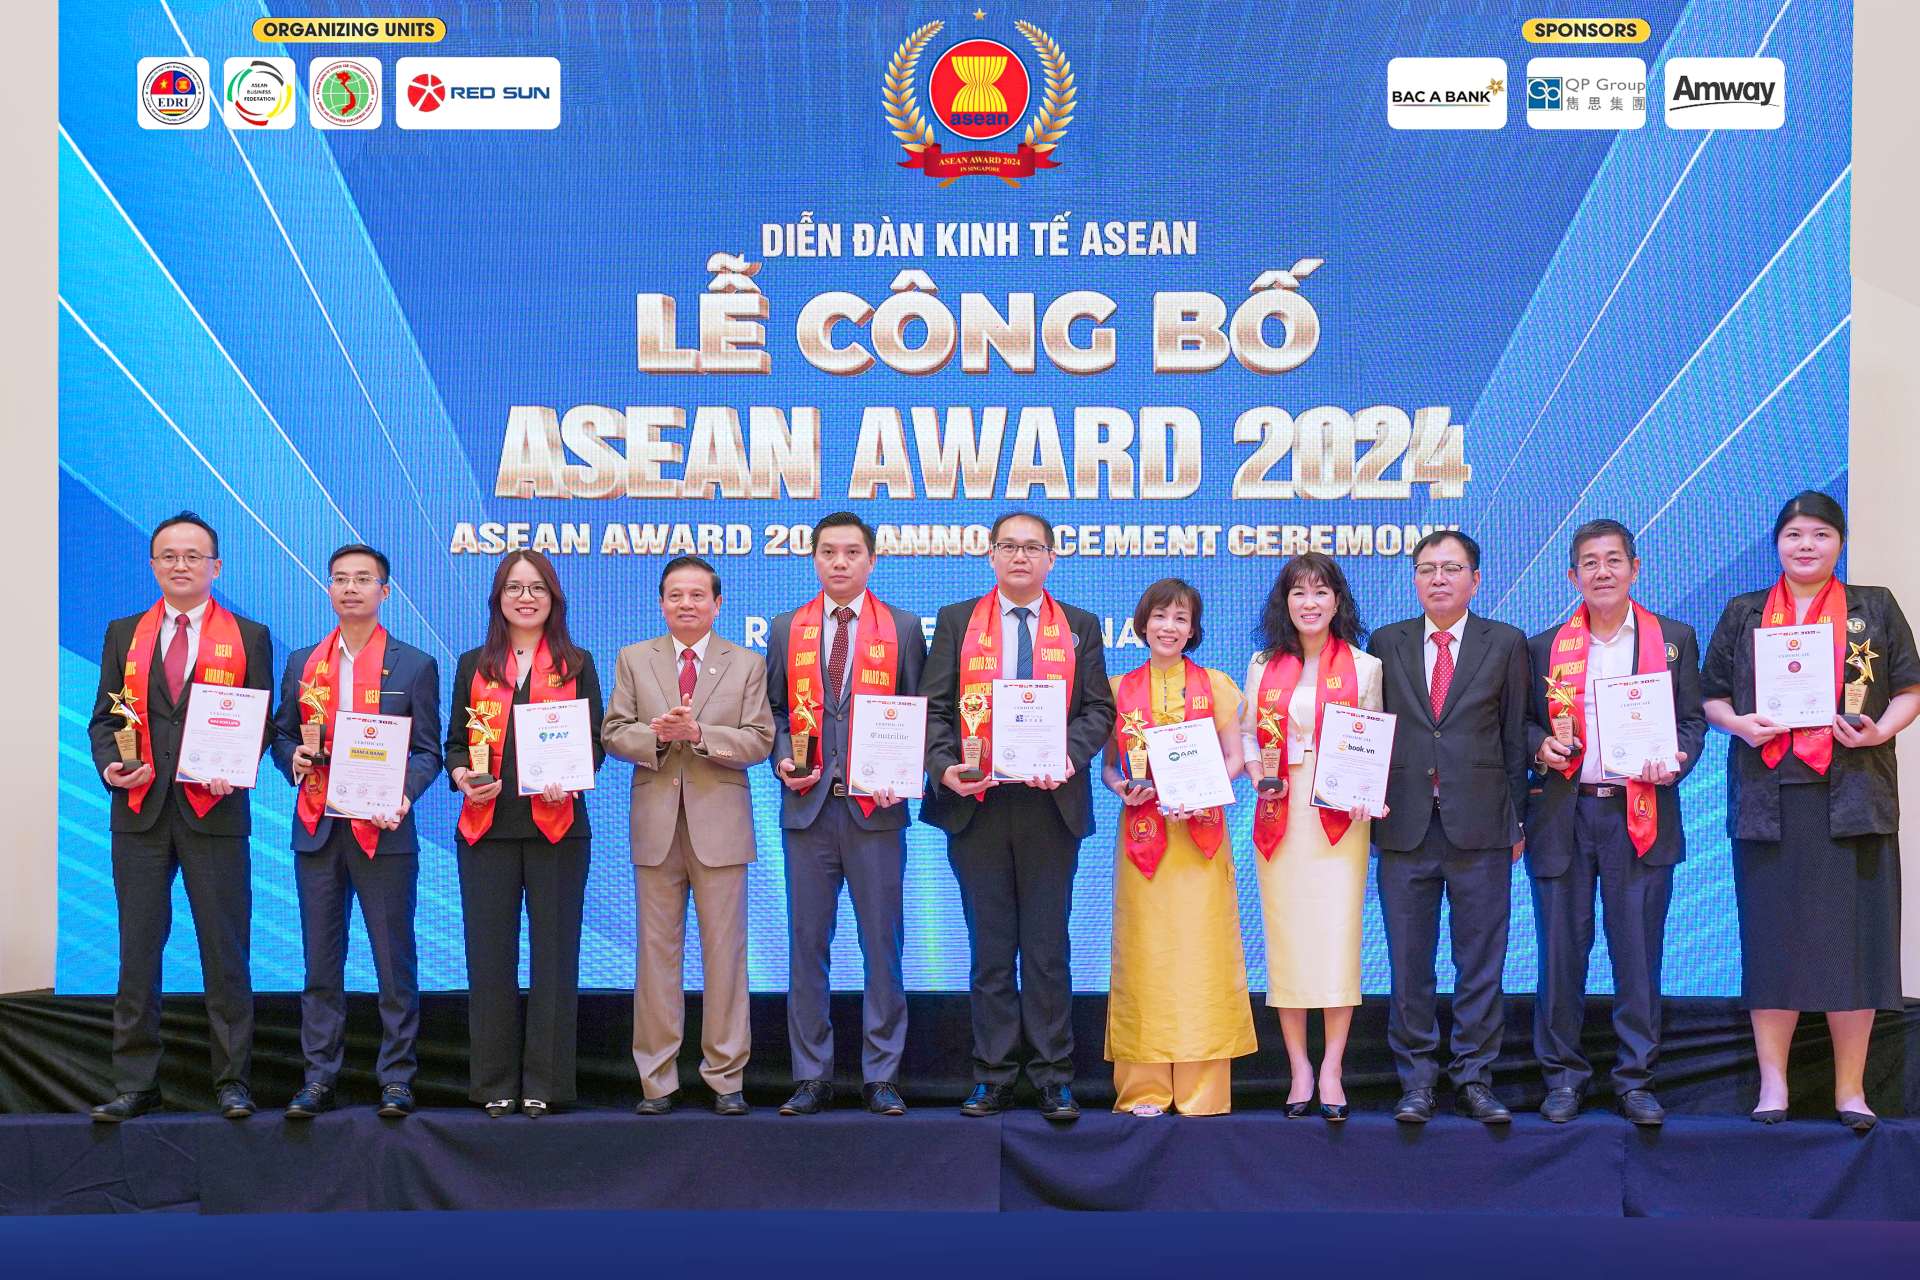 0Qwp-9pay-acclaimed-as-top-asean-enterprises-and-favorite-payment-channel-in-vietnam